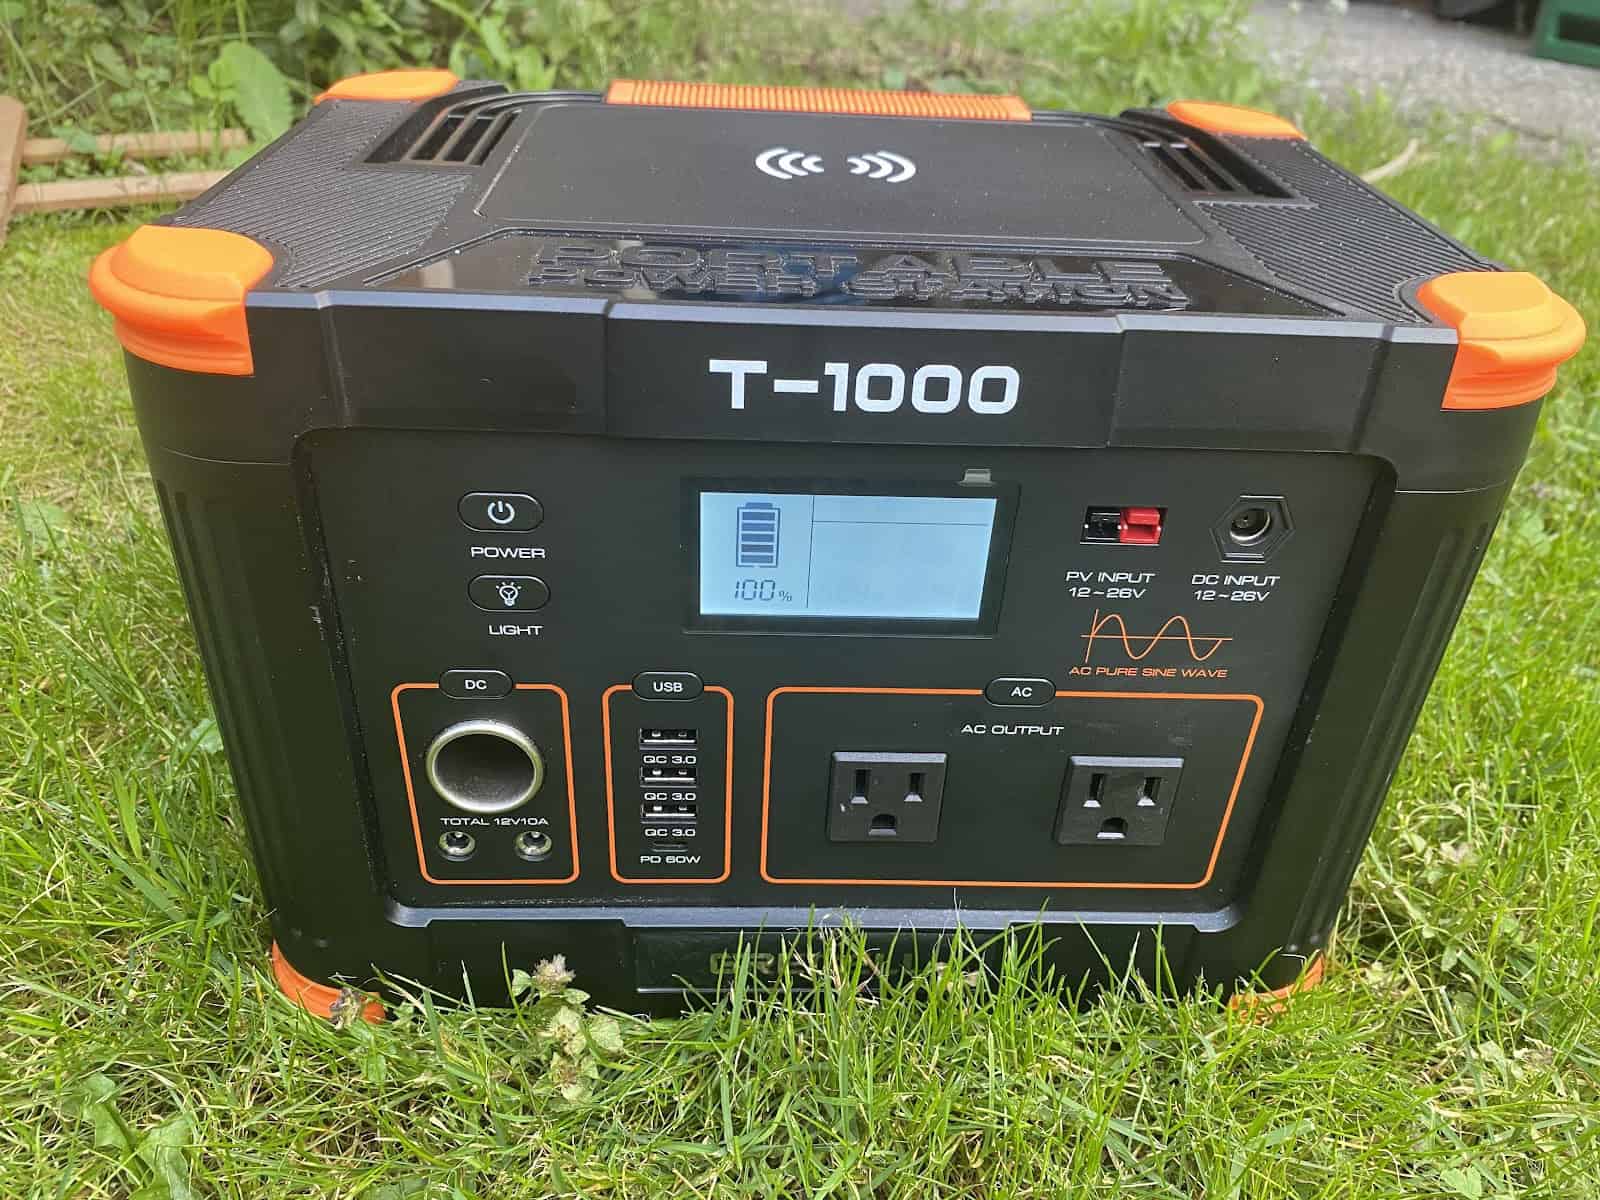 GRECELL T-1000 portable power station sitting on grass. Front section visible with a range of power outlets and an information screen.